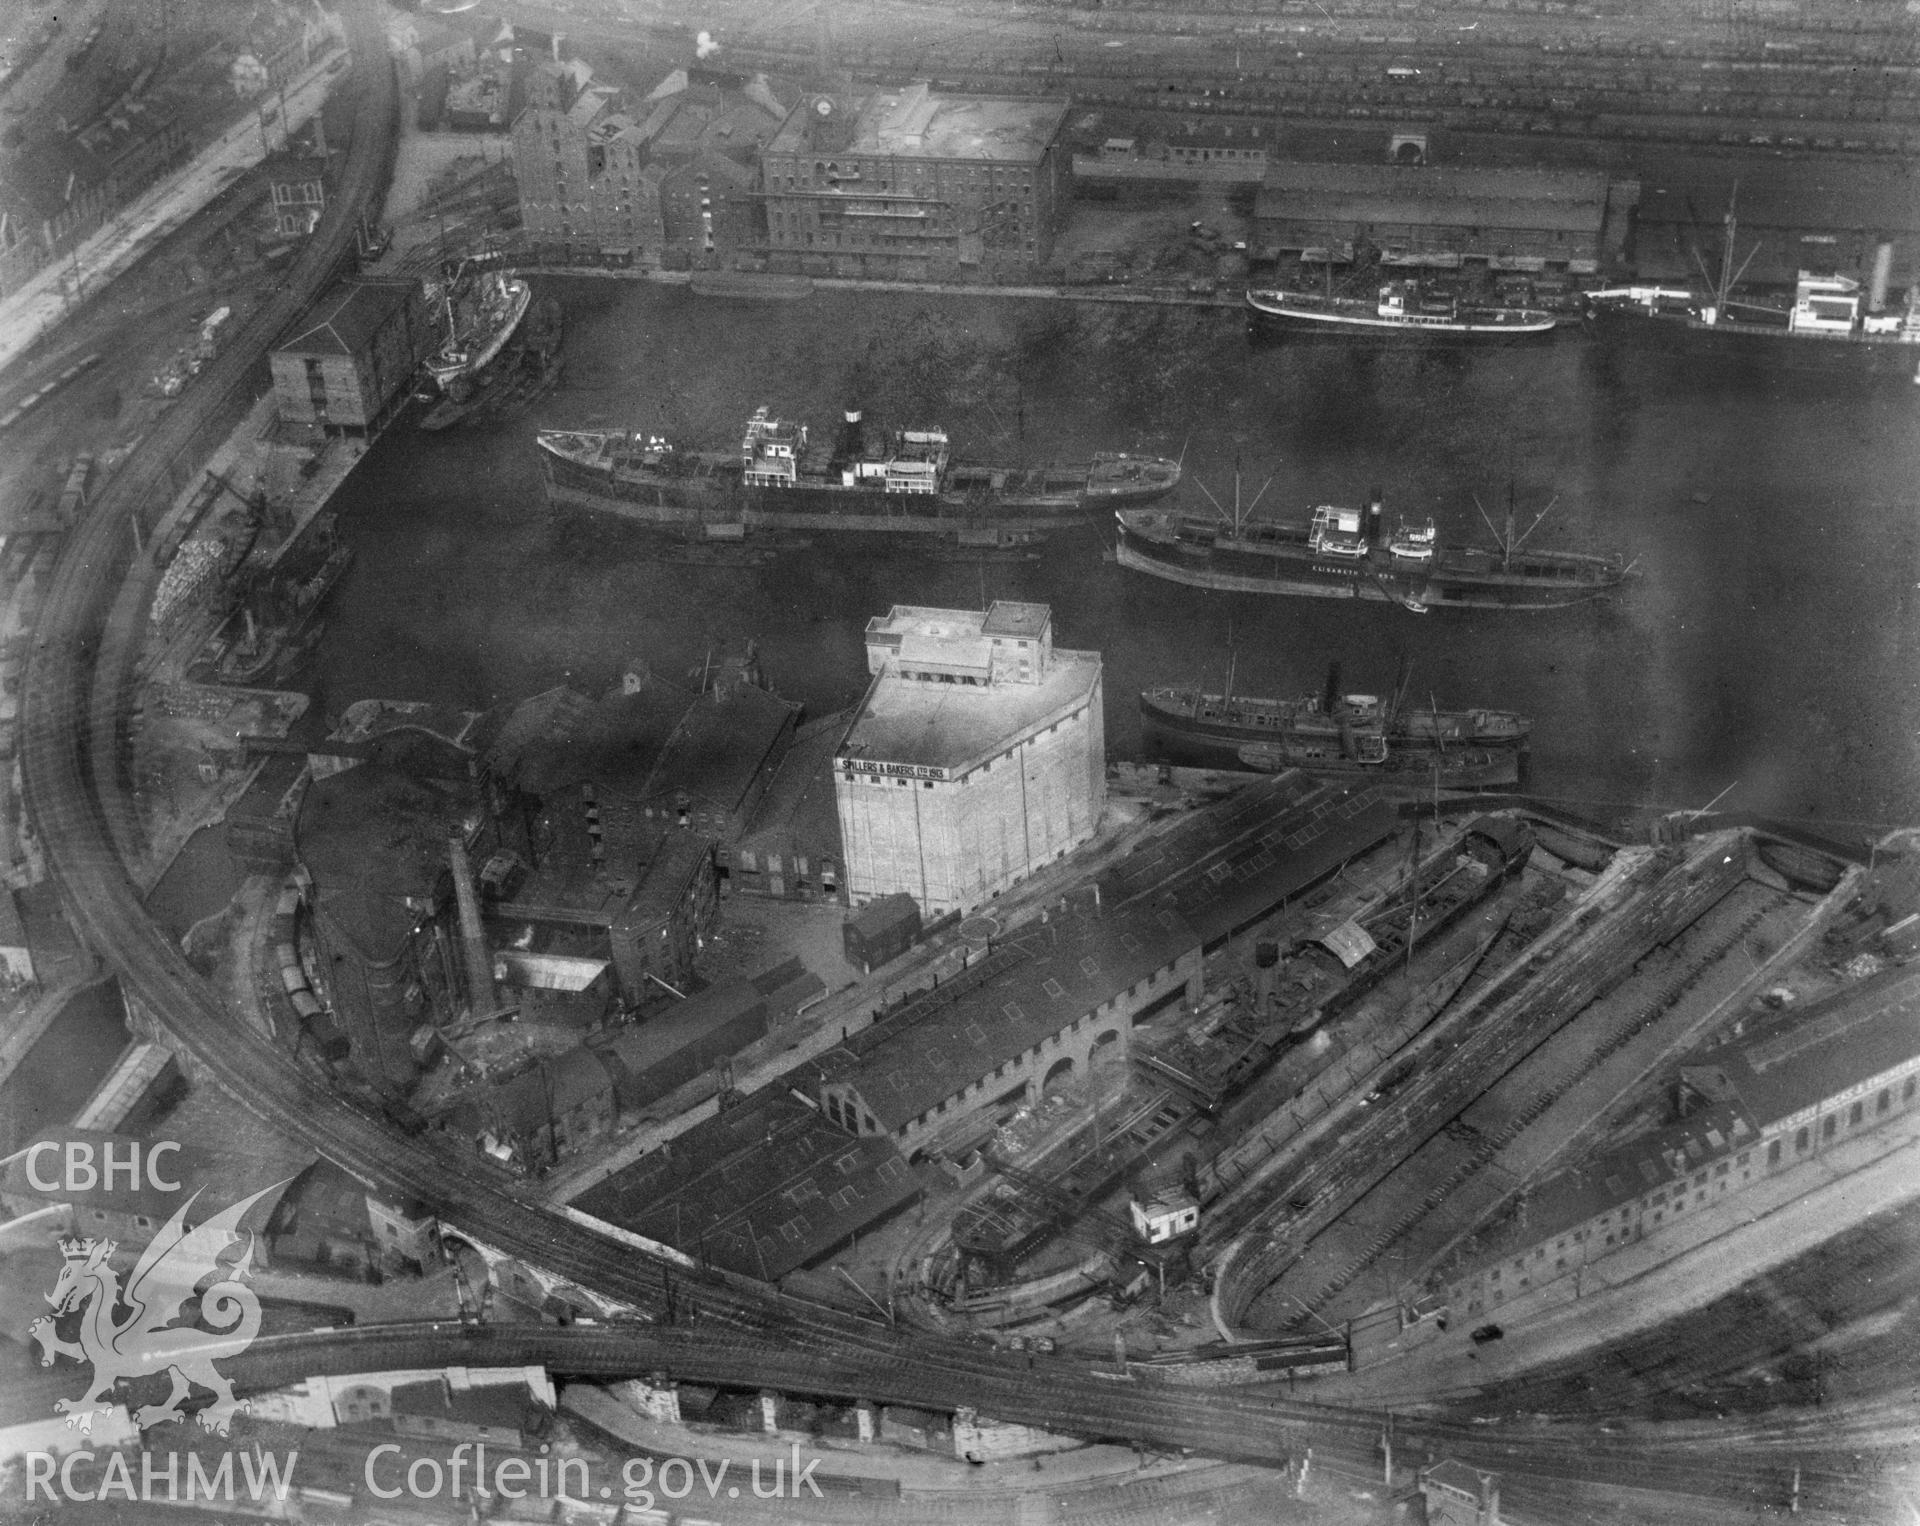 View of Cardiff East Bute Dock showing new Spillers biscuit factory, oblique aerial view. 5?x4? black and white glass plate negative.